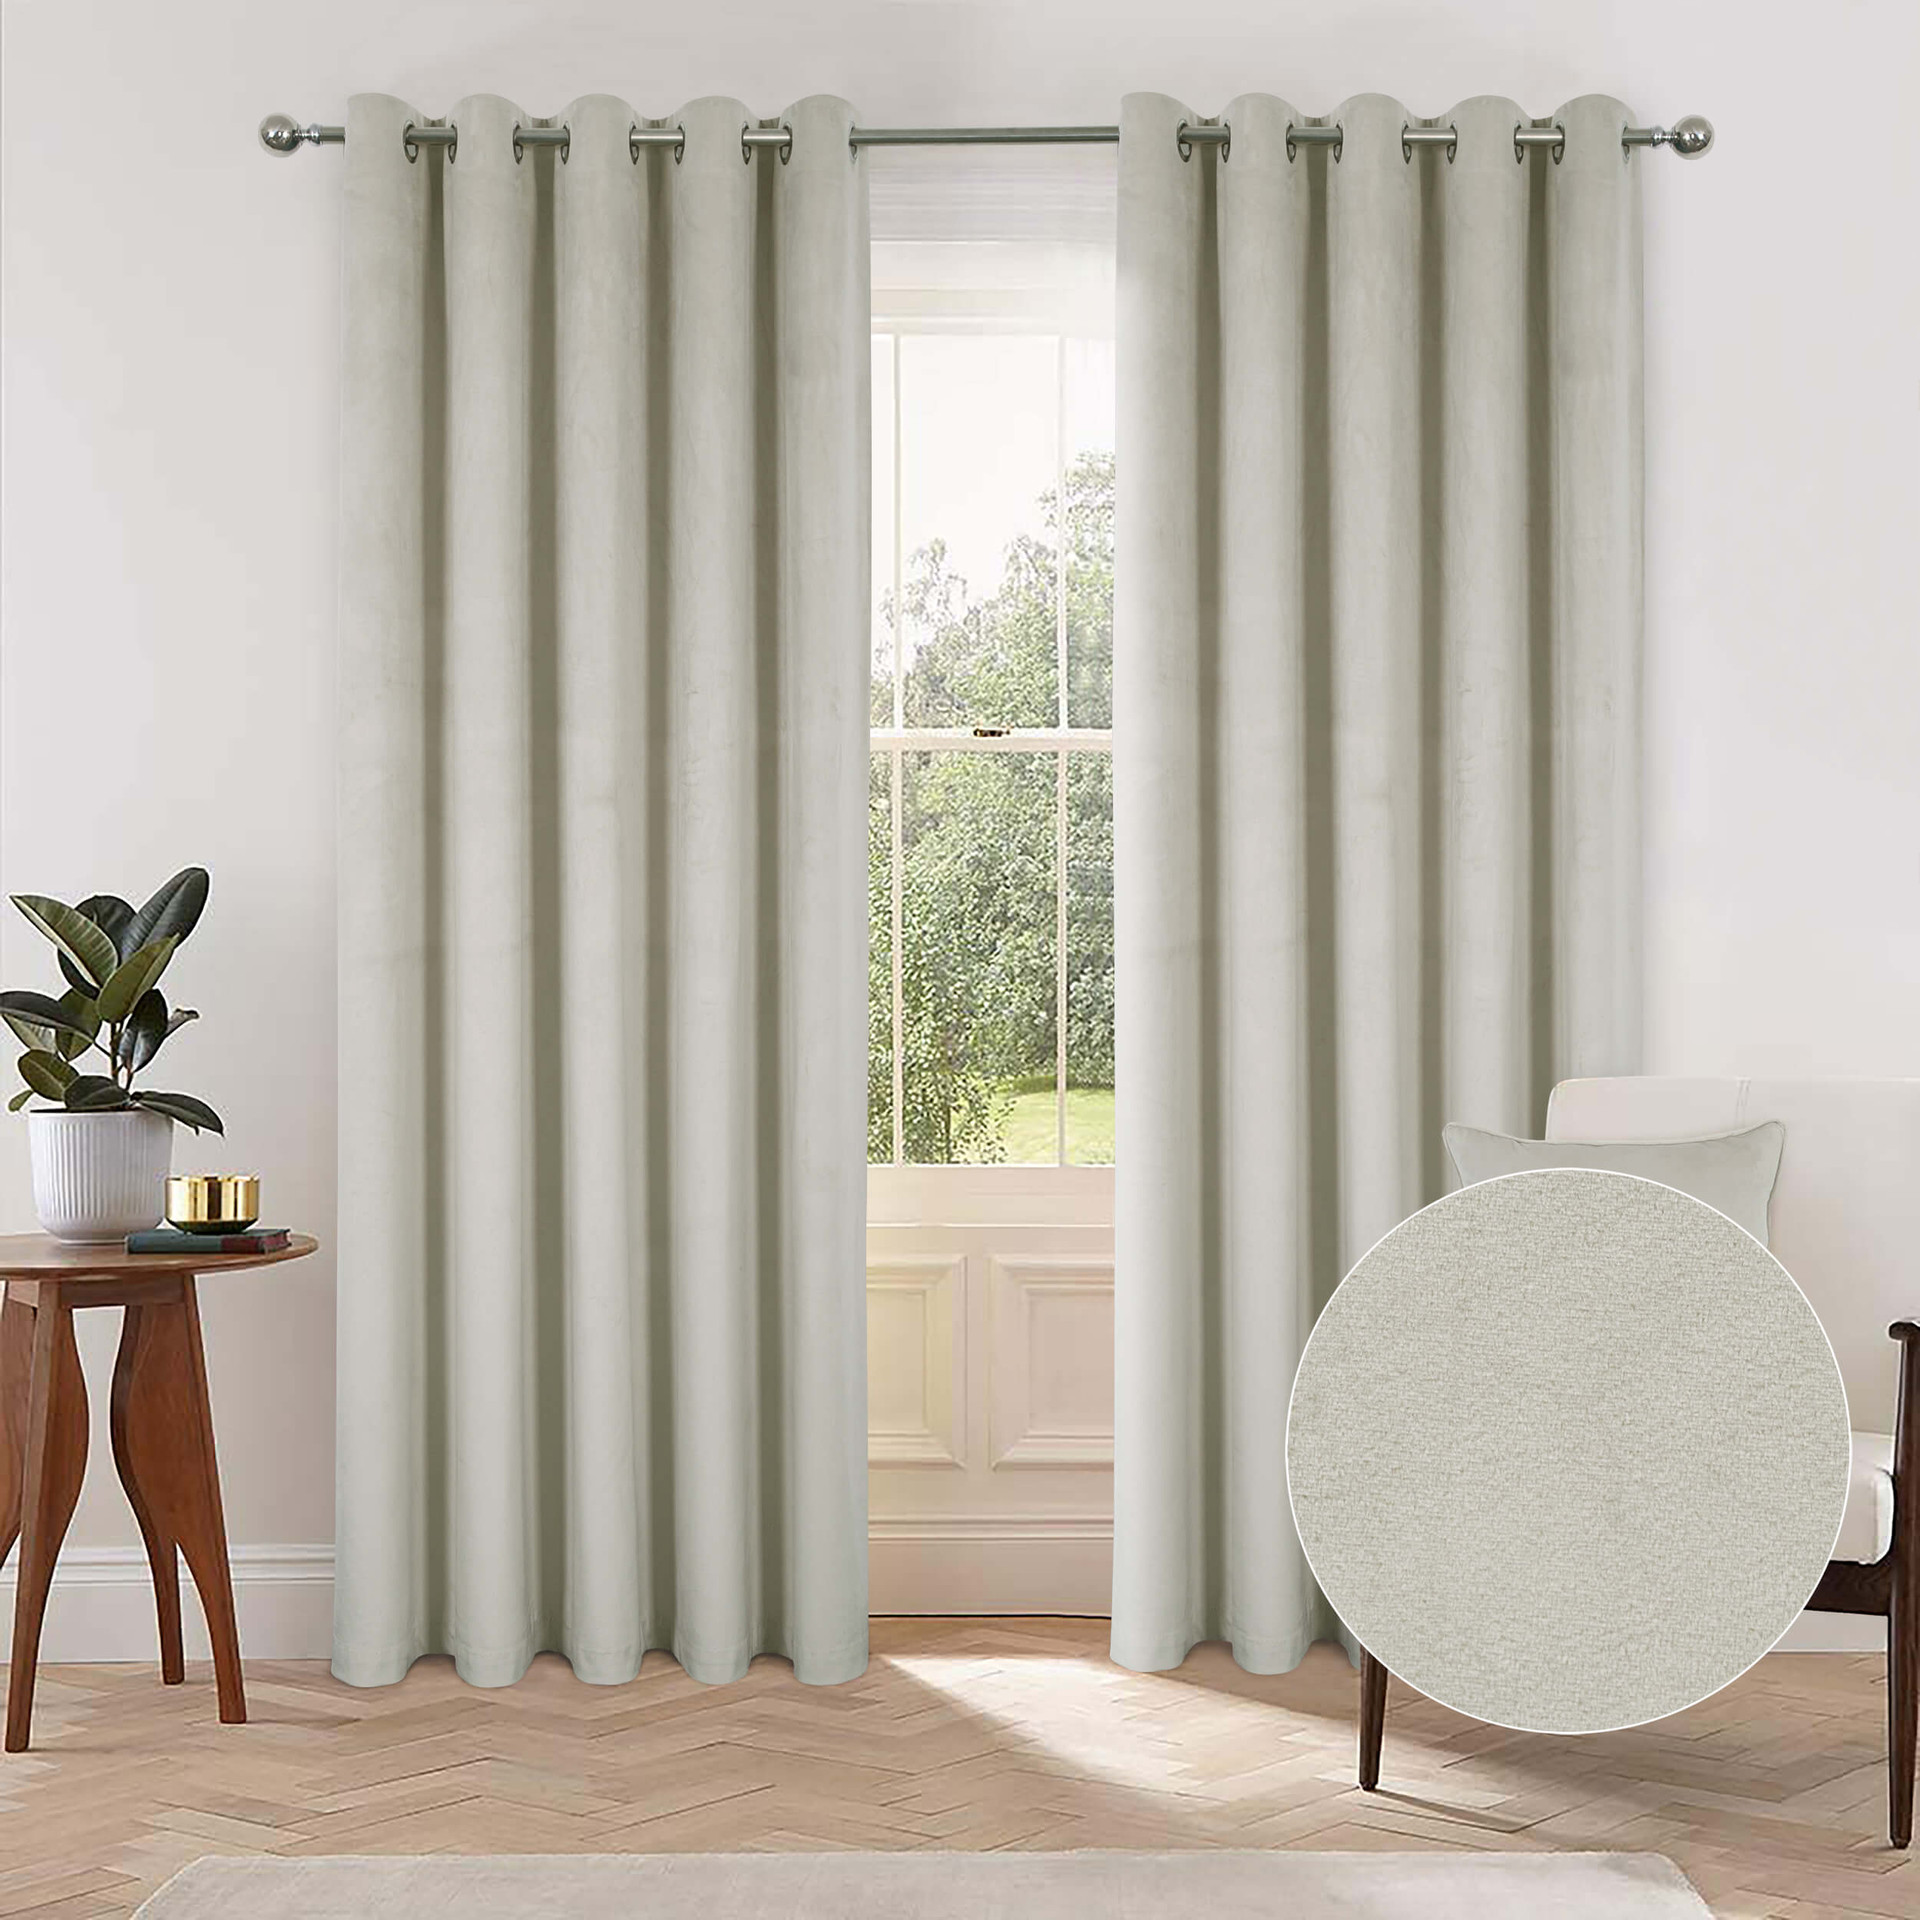 Asha Recycled Velour Eyelet Curtains | The Mill Shop